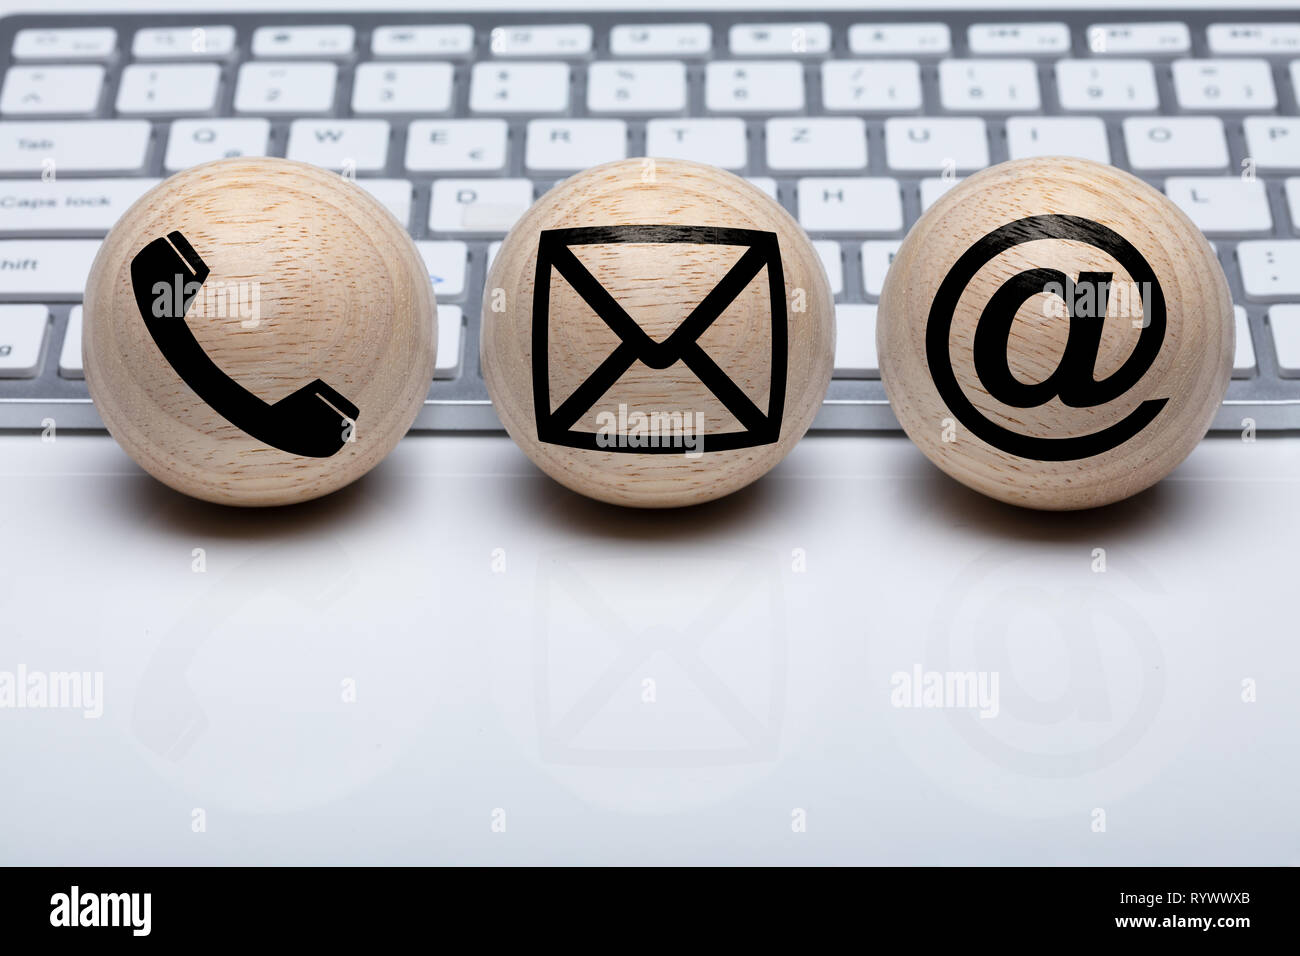 Three Wooden Sphere Shape Ball With Contact Icon In Front Of White Keyboard Stock Photo